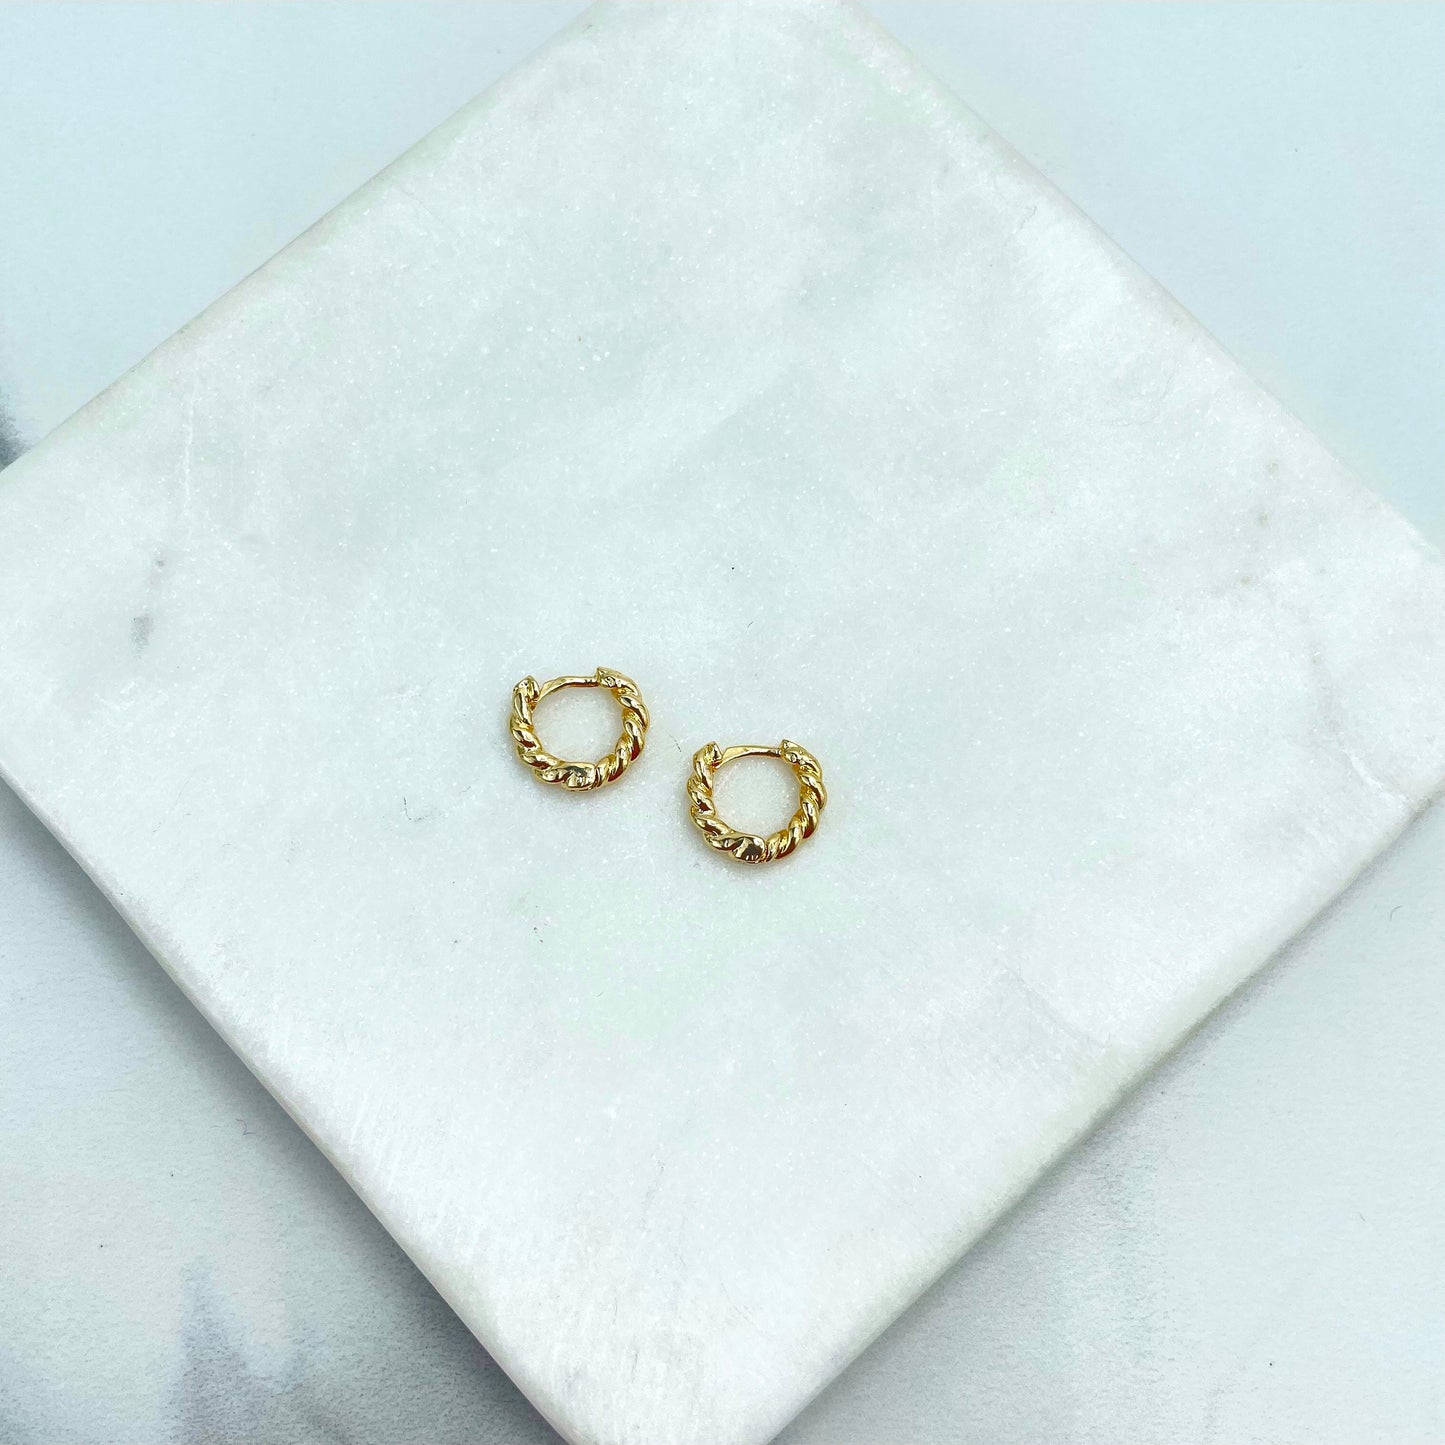 18k Gold Filled 8mm, 5mm or 2mm Croissant Design Hoops Earrings Wholesale Jewelry Making Supplies